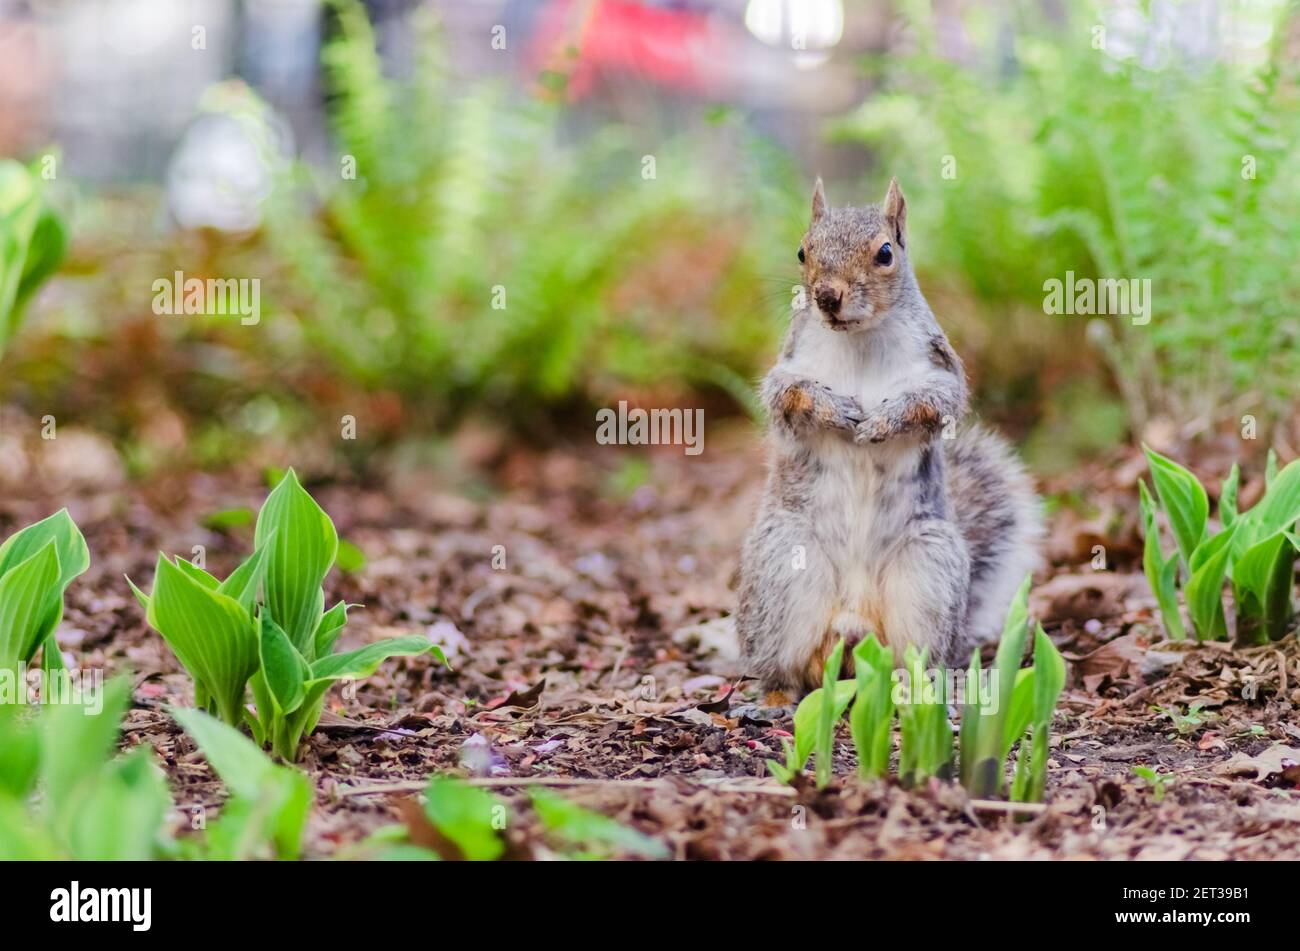 Close up view of a squirrel standing still in Manhattan New York Stock Photo